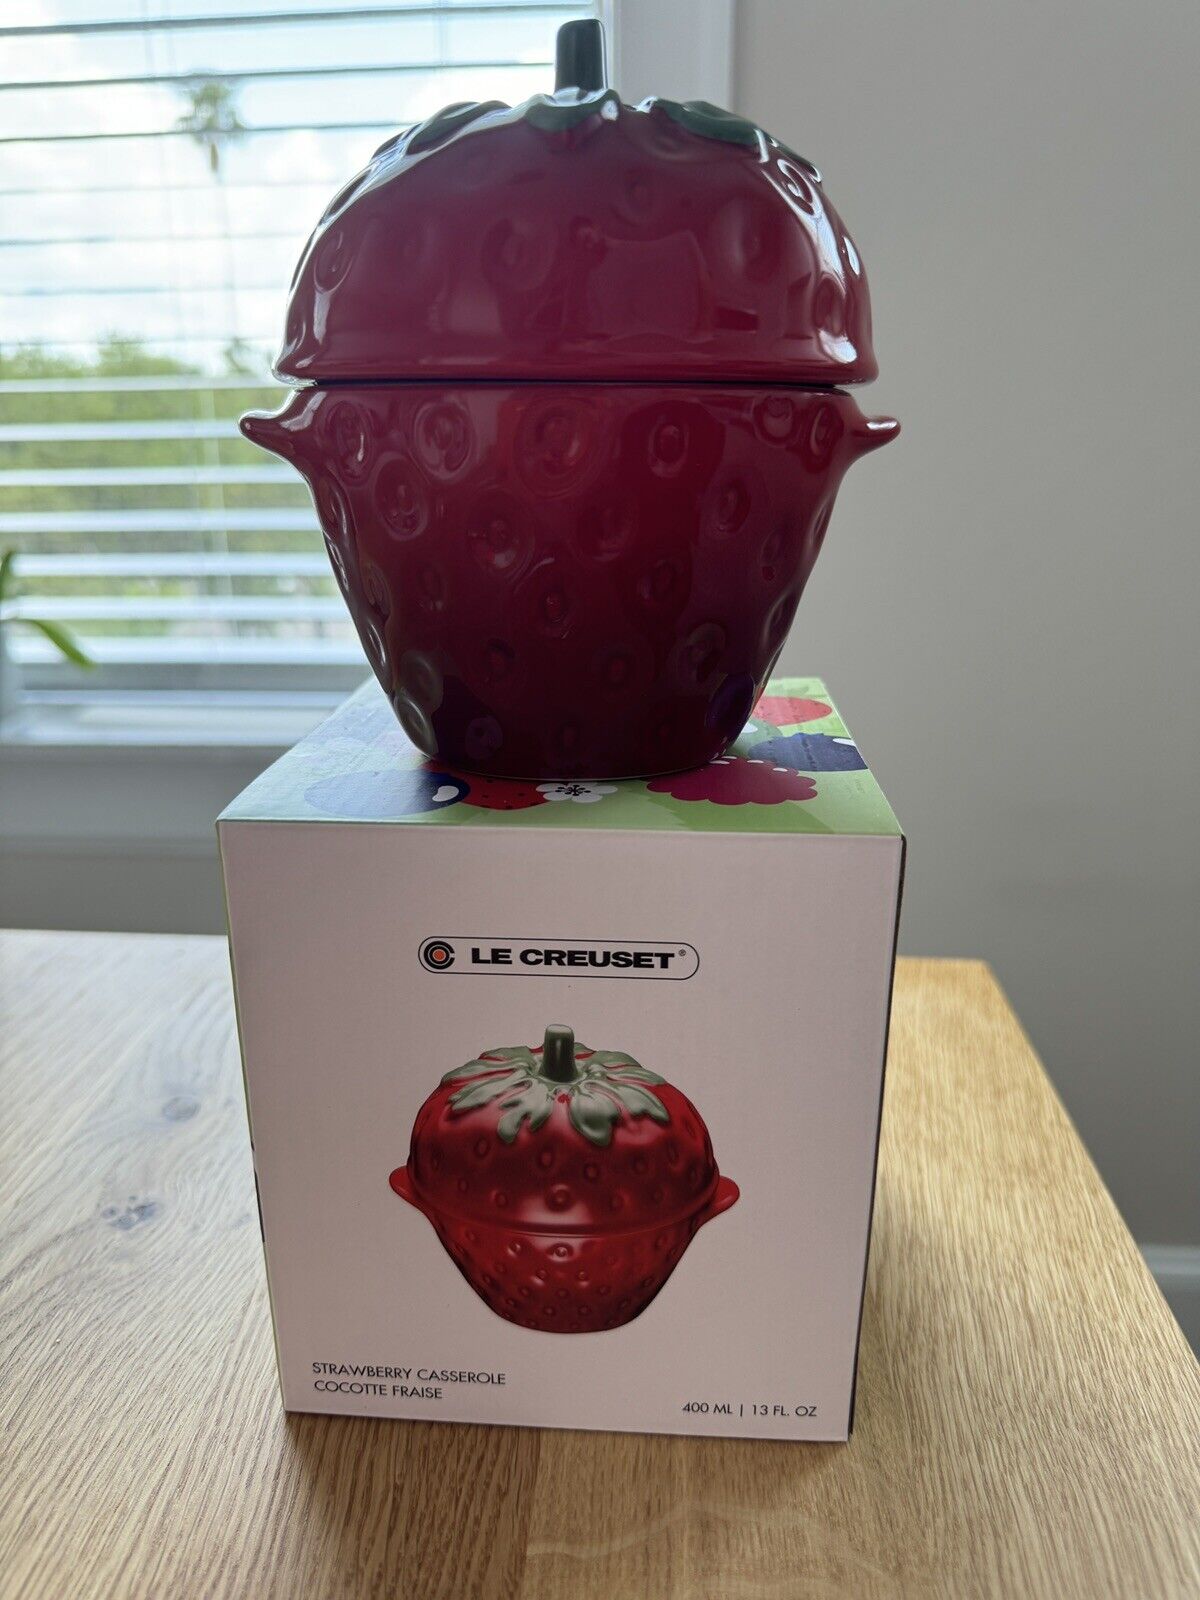 Le Creuset NEW IN BOX Strawberry Cocotte fruit